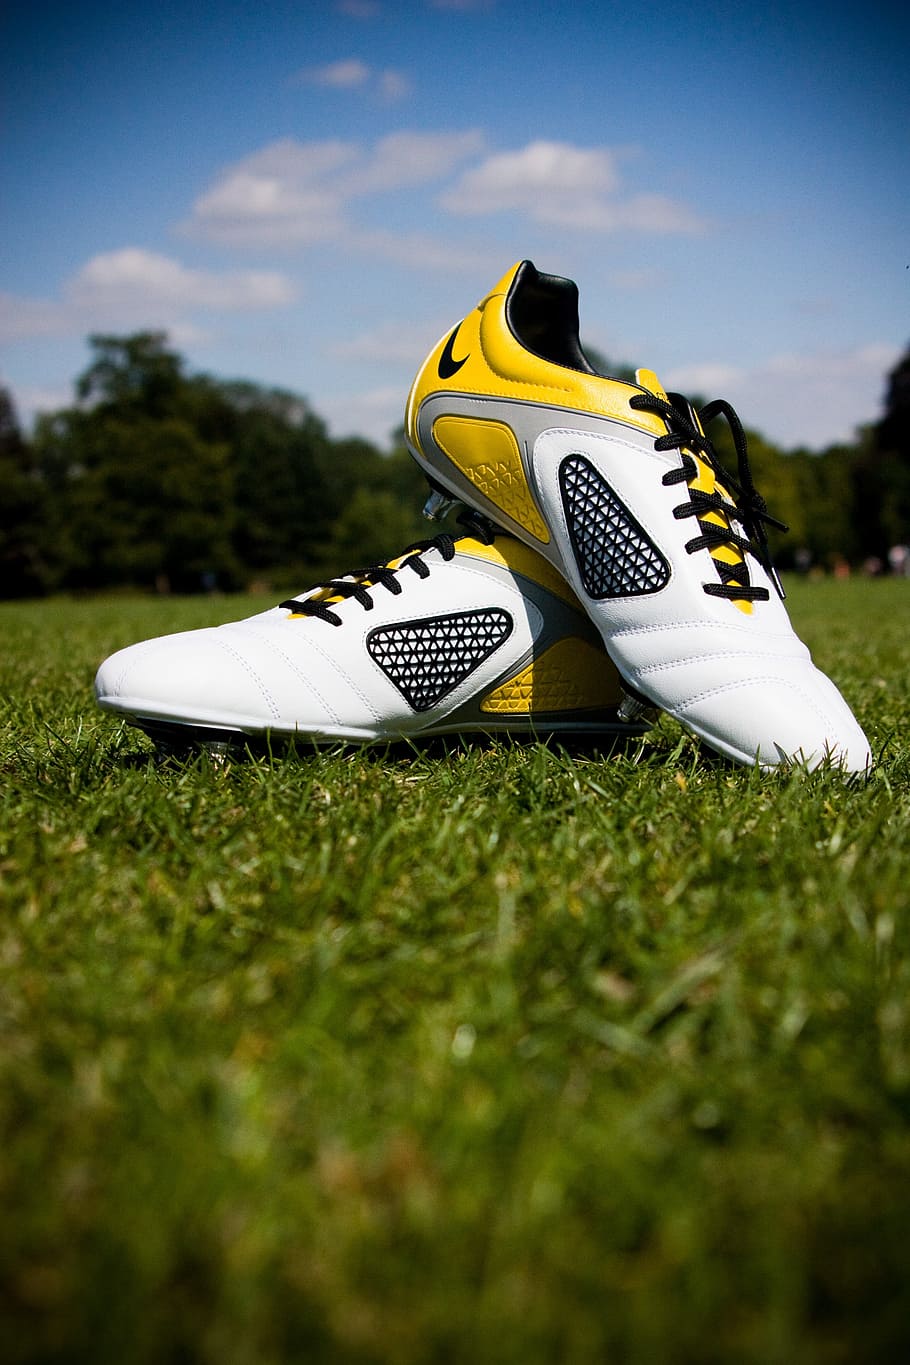 pair of white-and-yellow Nike soccer cleats on field during daytime, HD wallpaper